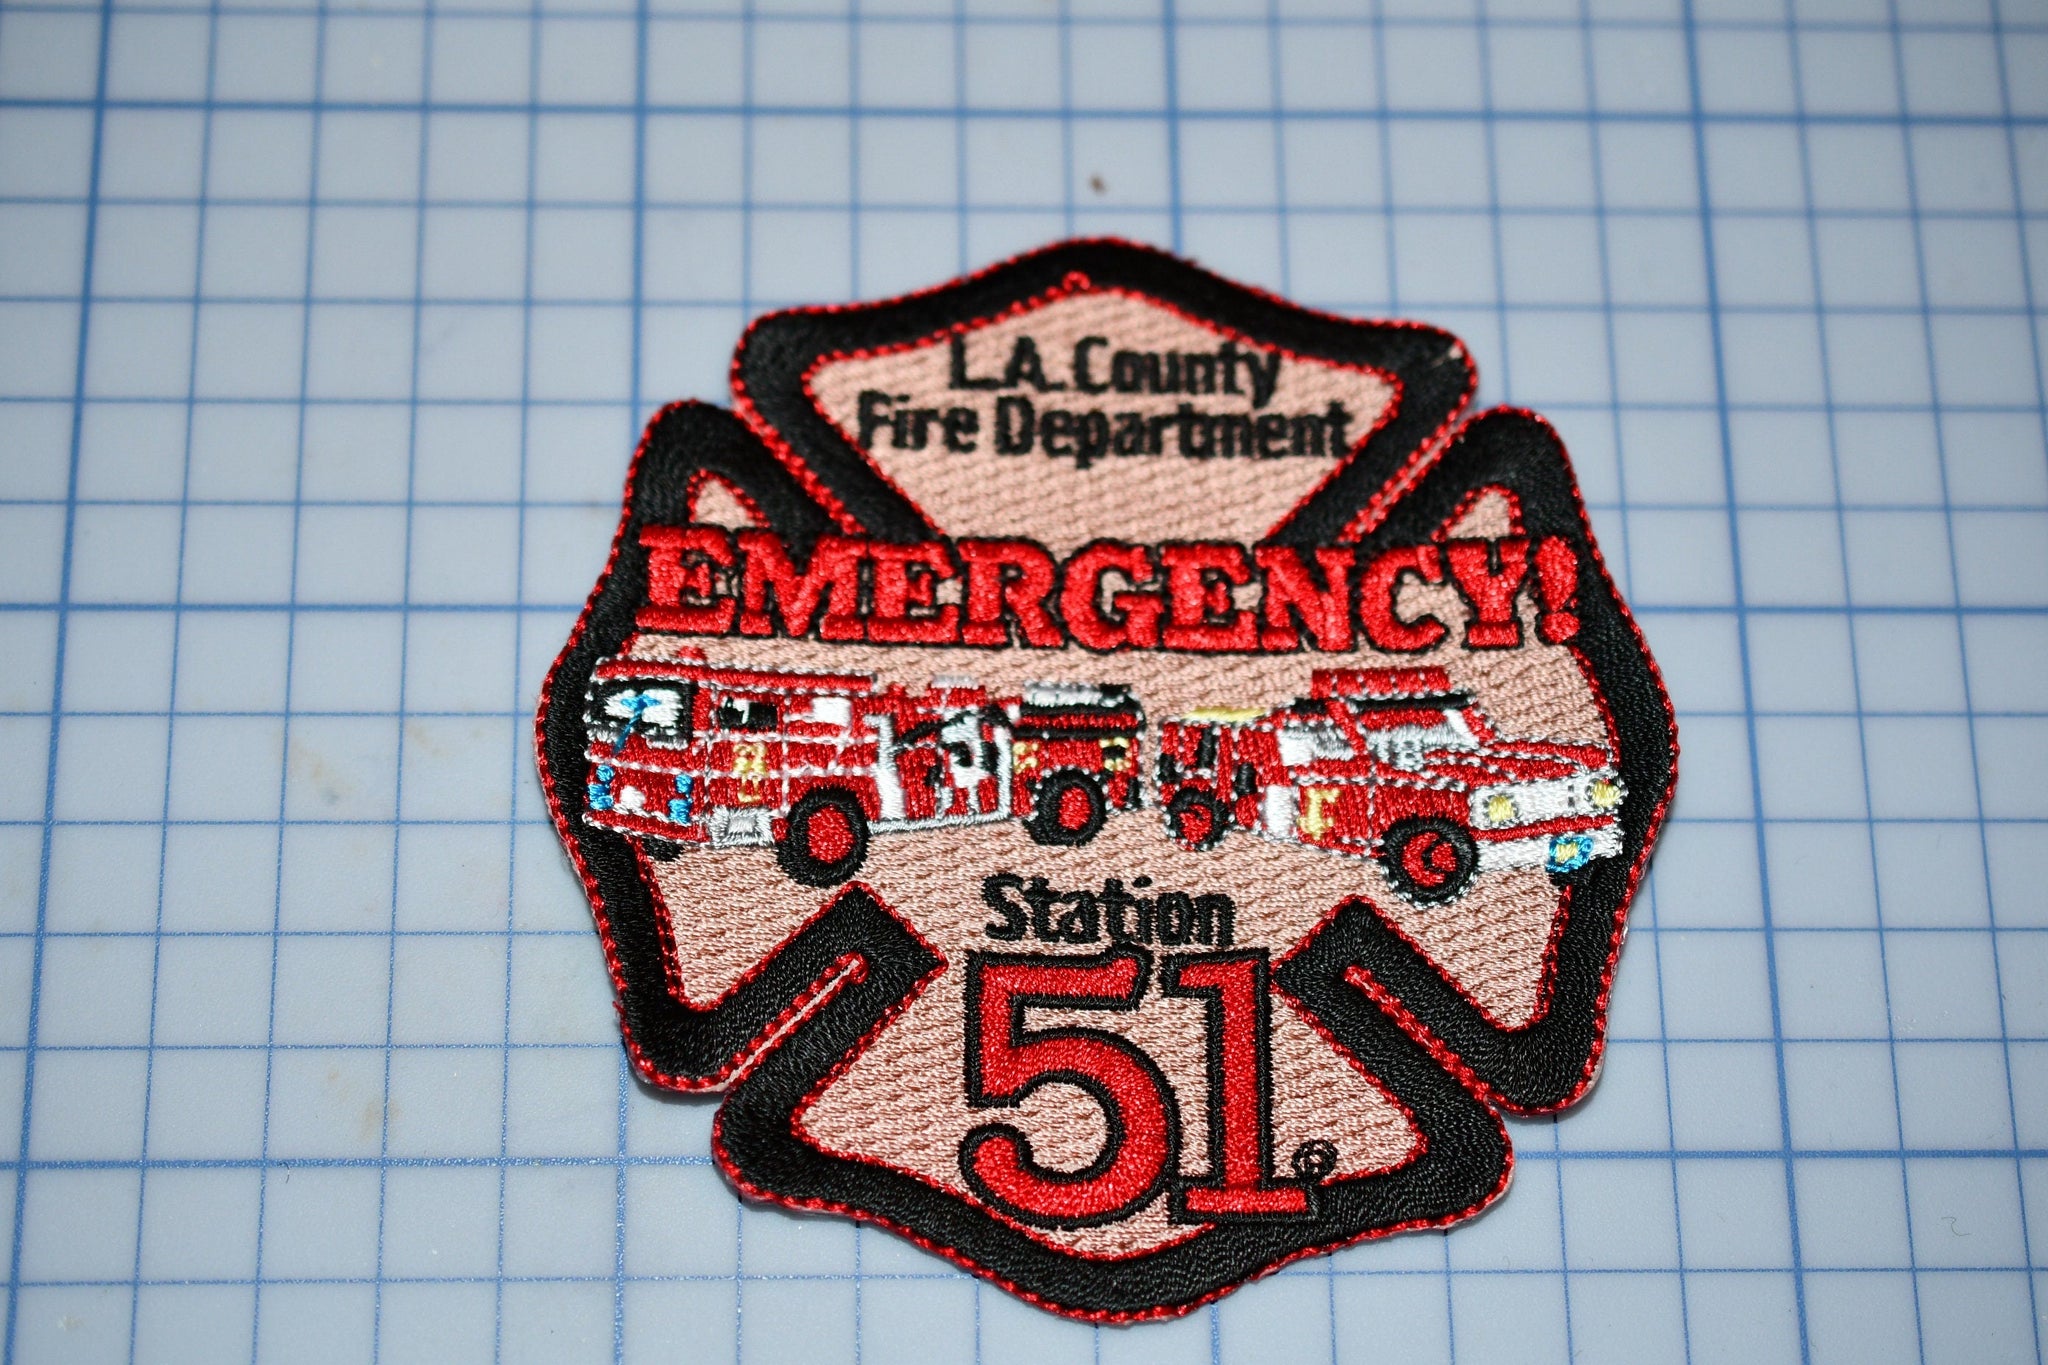 Los Angeles Fire Department Station 51 Patch (B26)